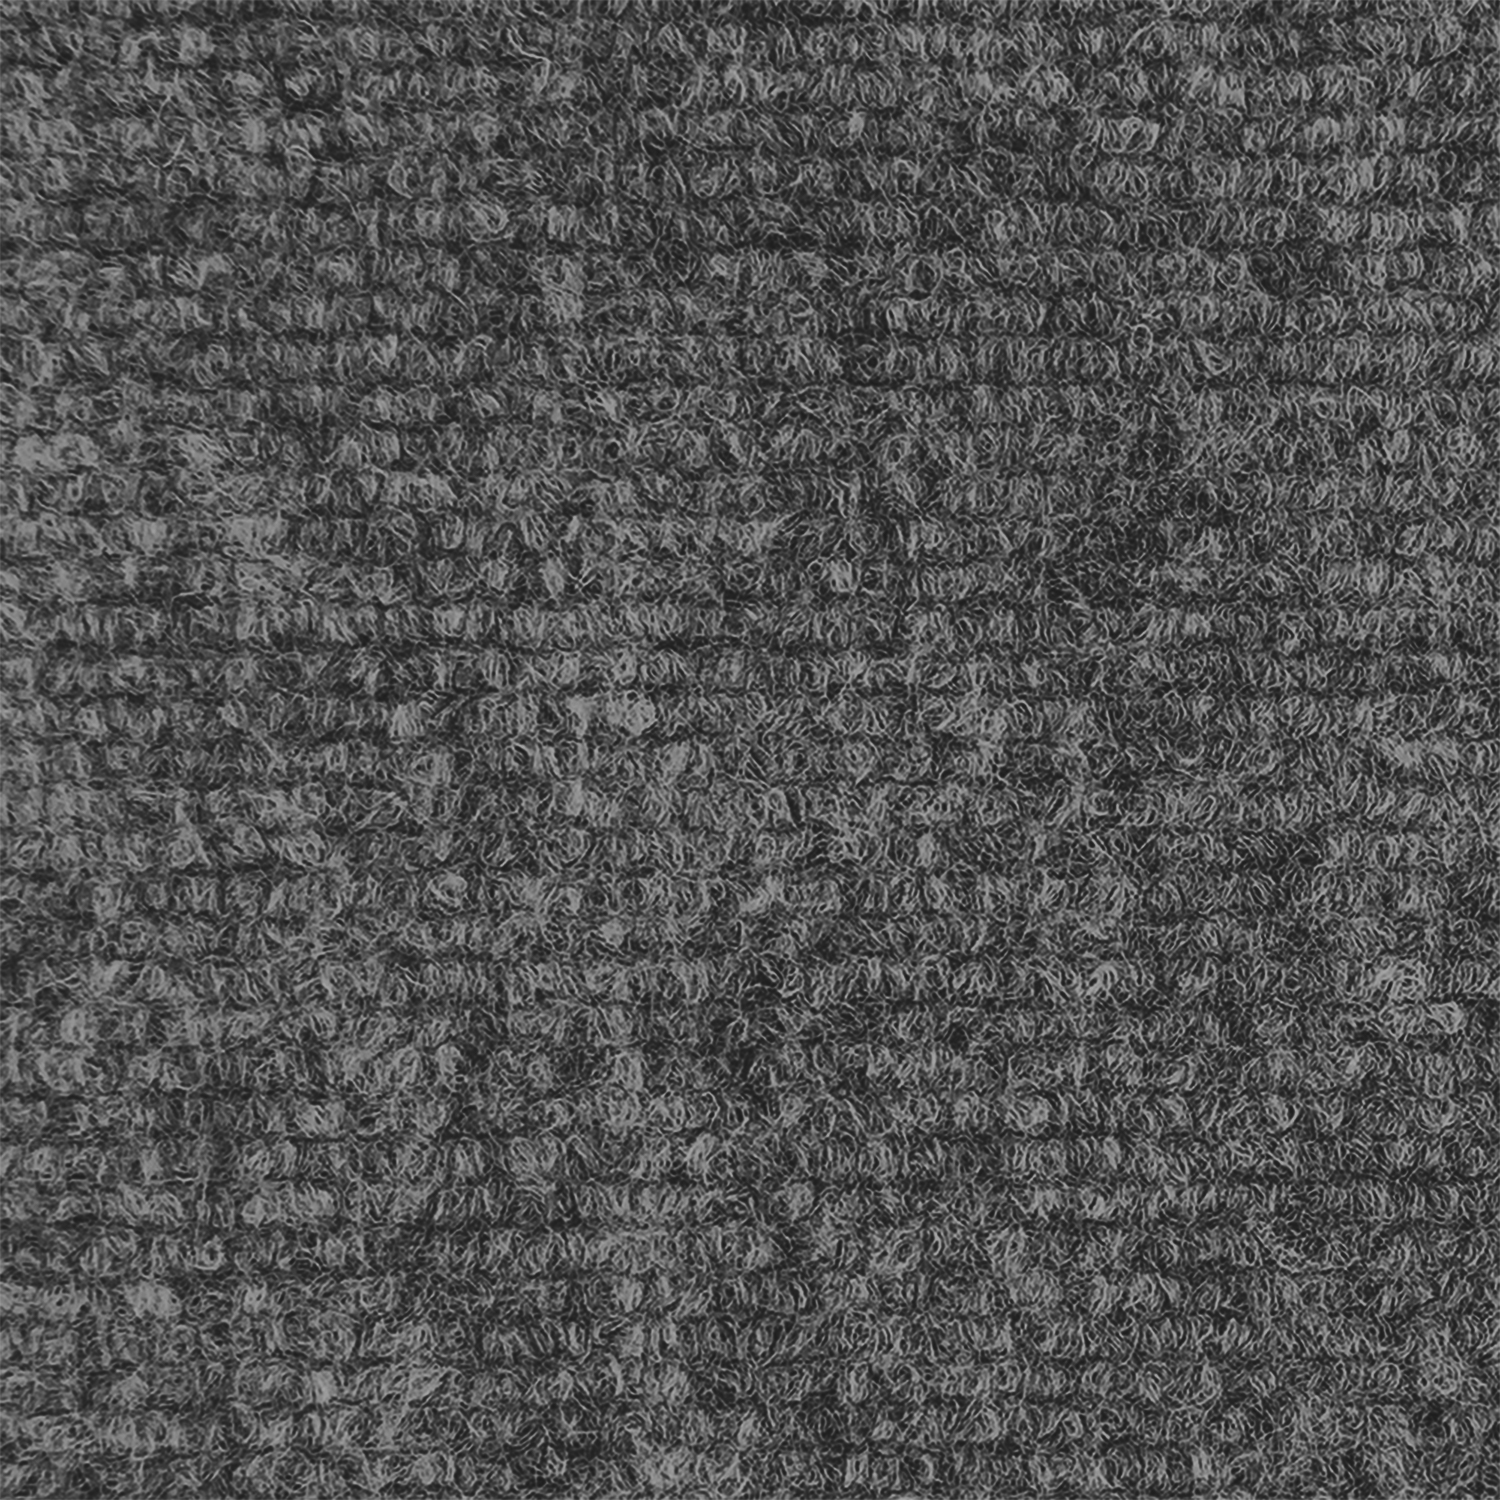 House, Home and More Indoor/Outdoor Carpet - Gray - 6' x 50'